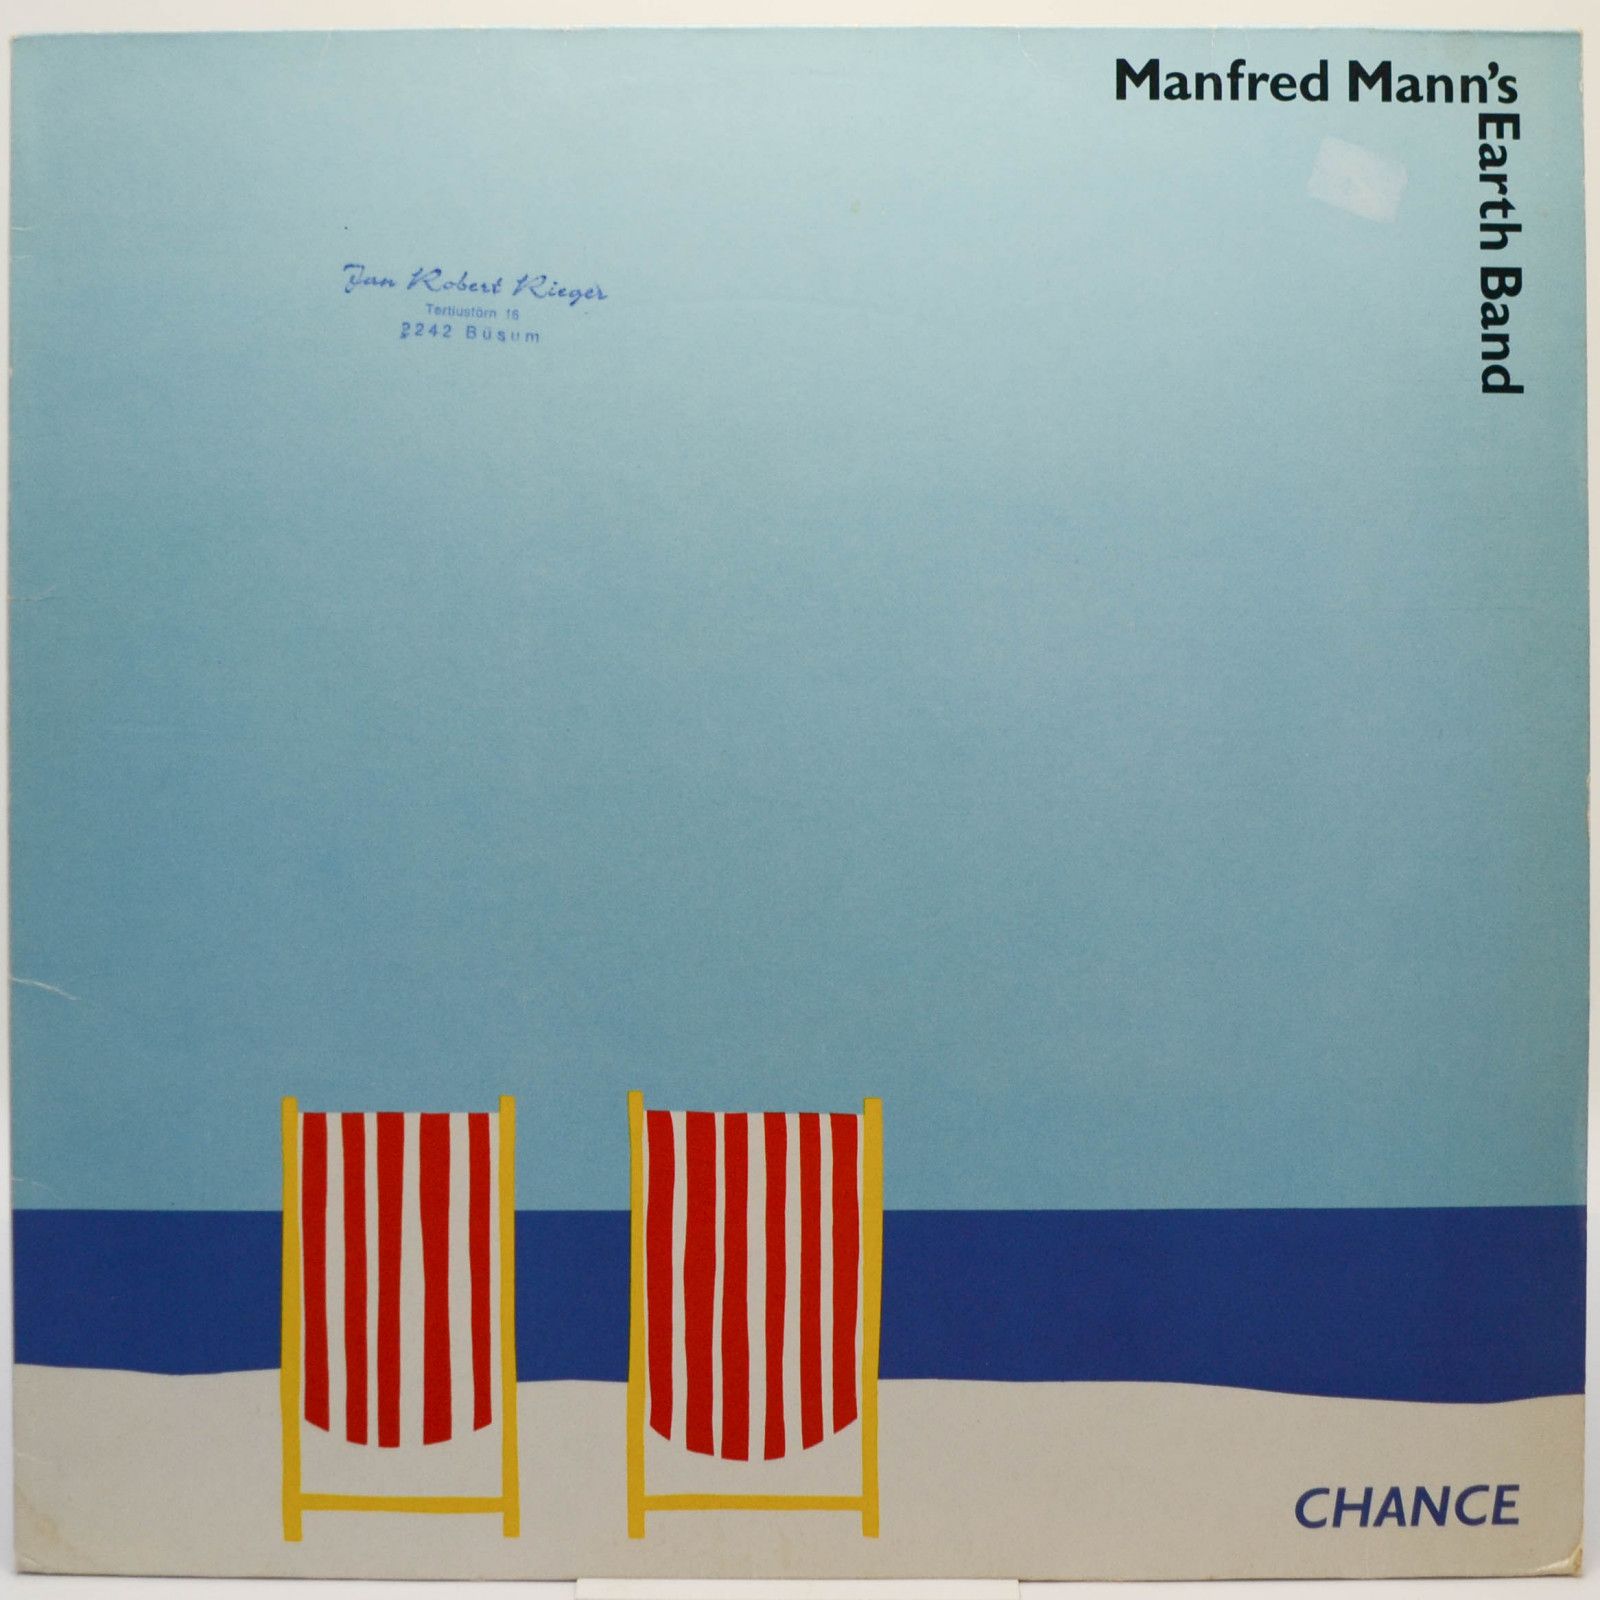 Manfred Mann's Earth Band — Chance, 1980